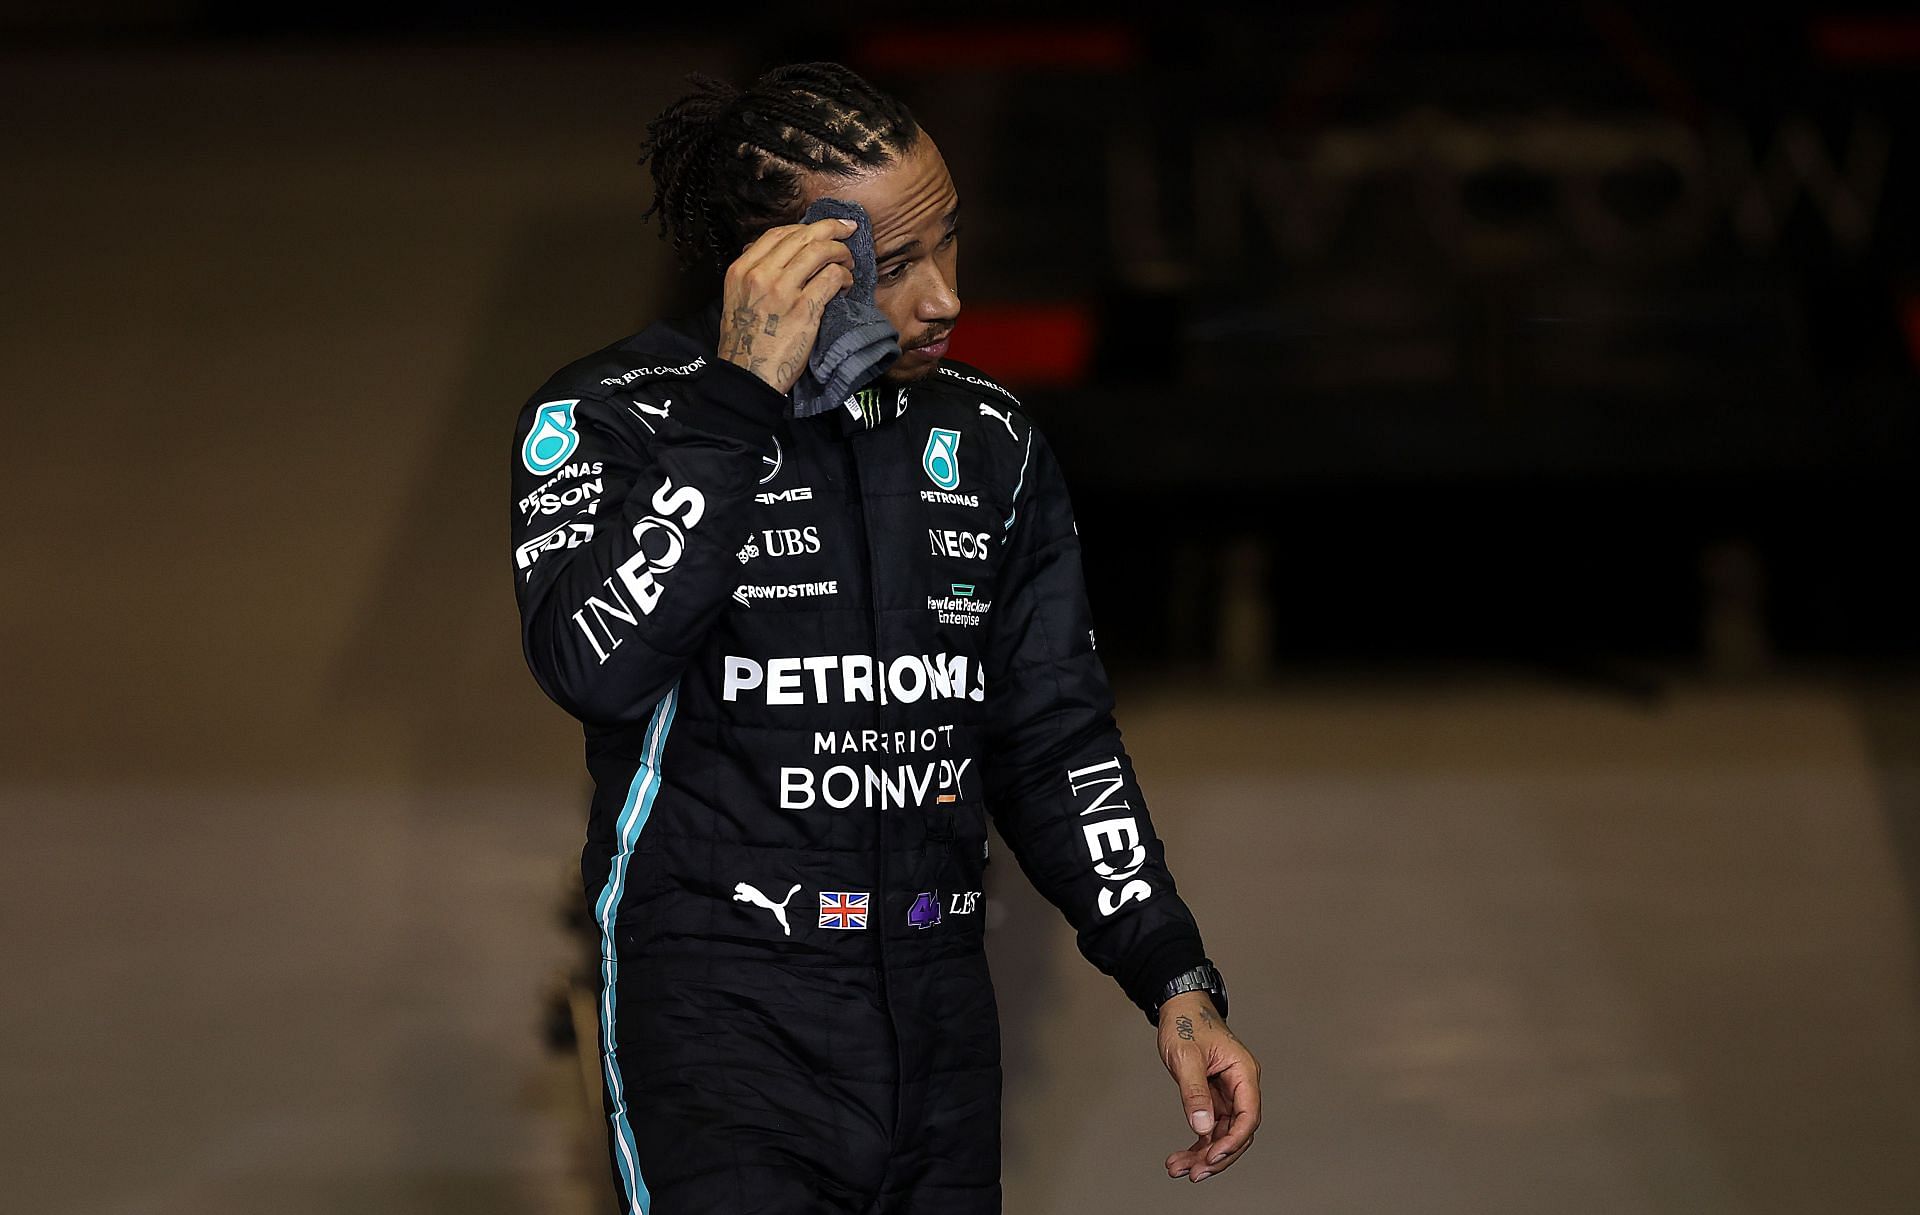 Lewis Hamilton shortly after the 2021 Abu Dhabi Grand Prix (Photo by Lars Baron/Getty Images)